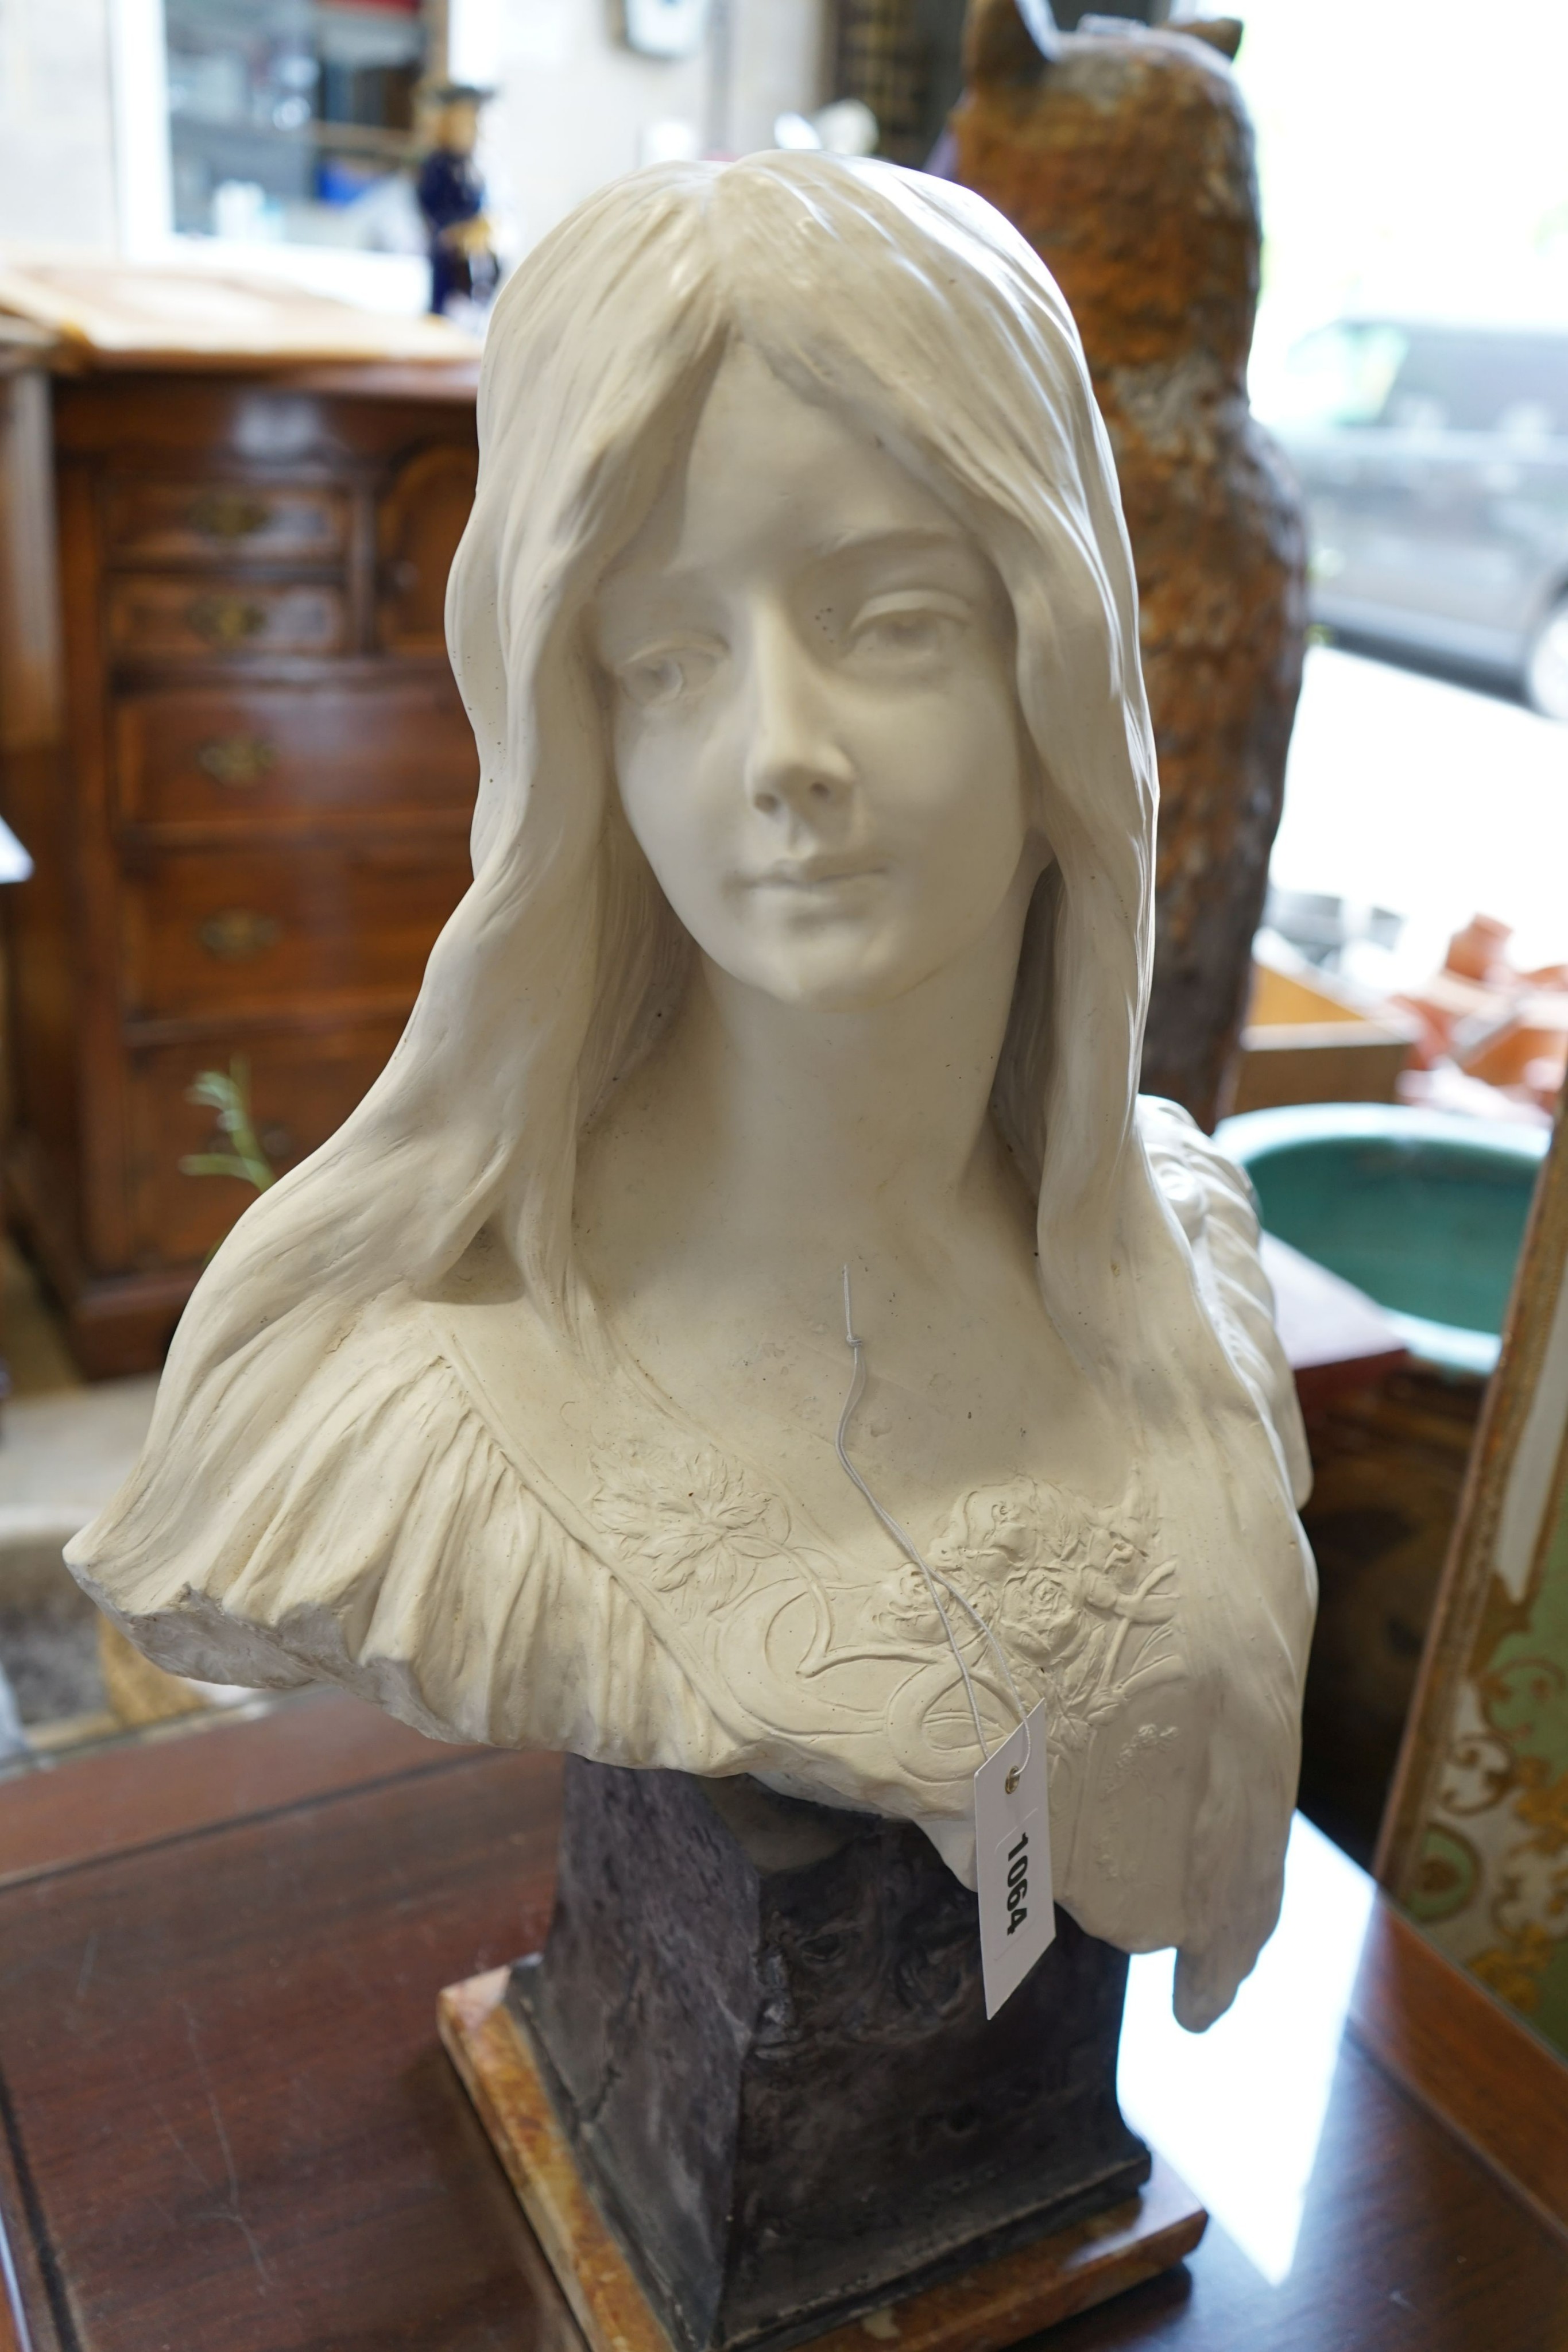 A composition faux marble 'Poesie' bust, height 58cm